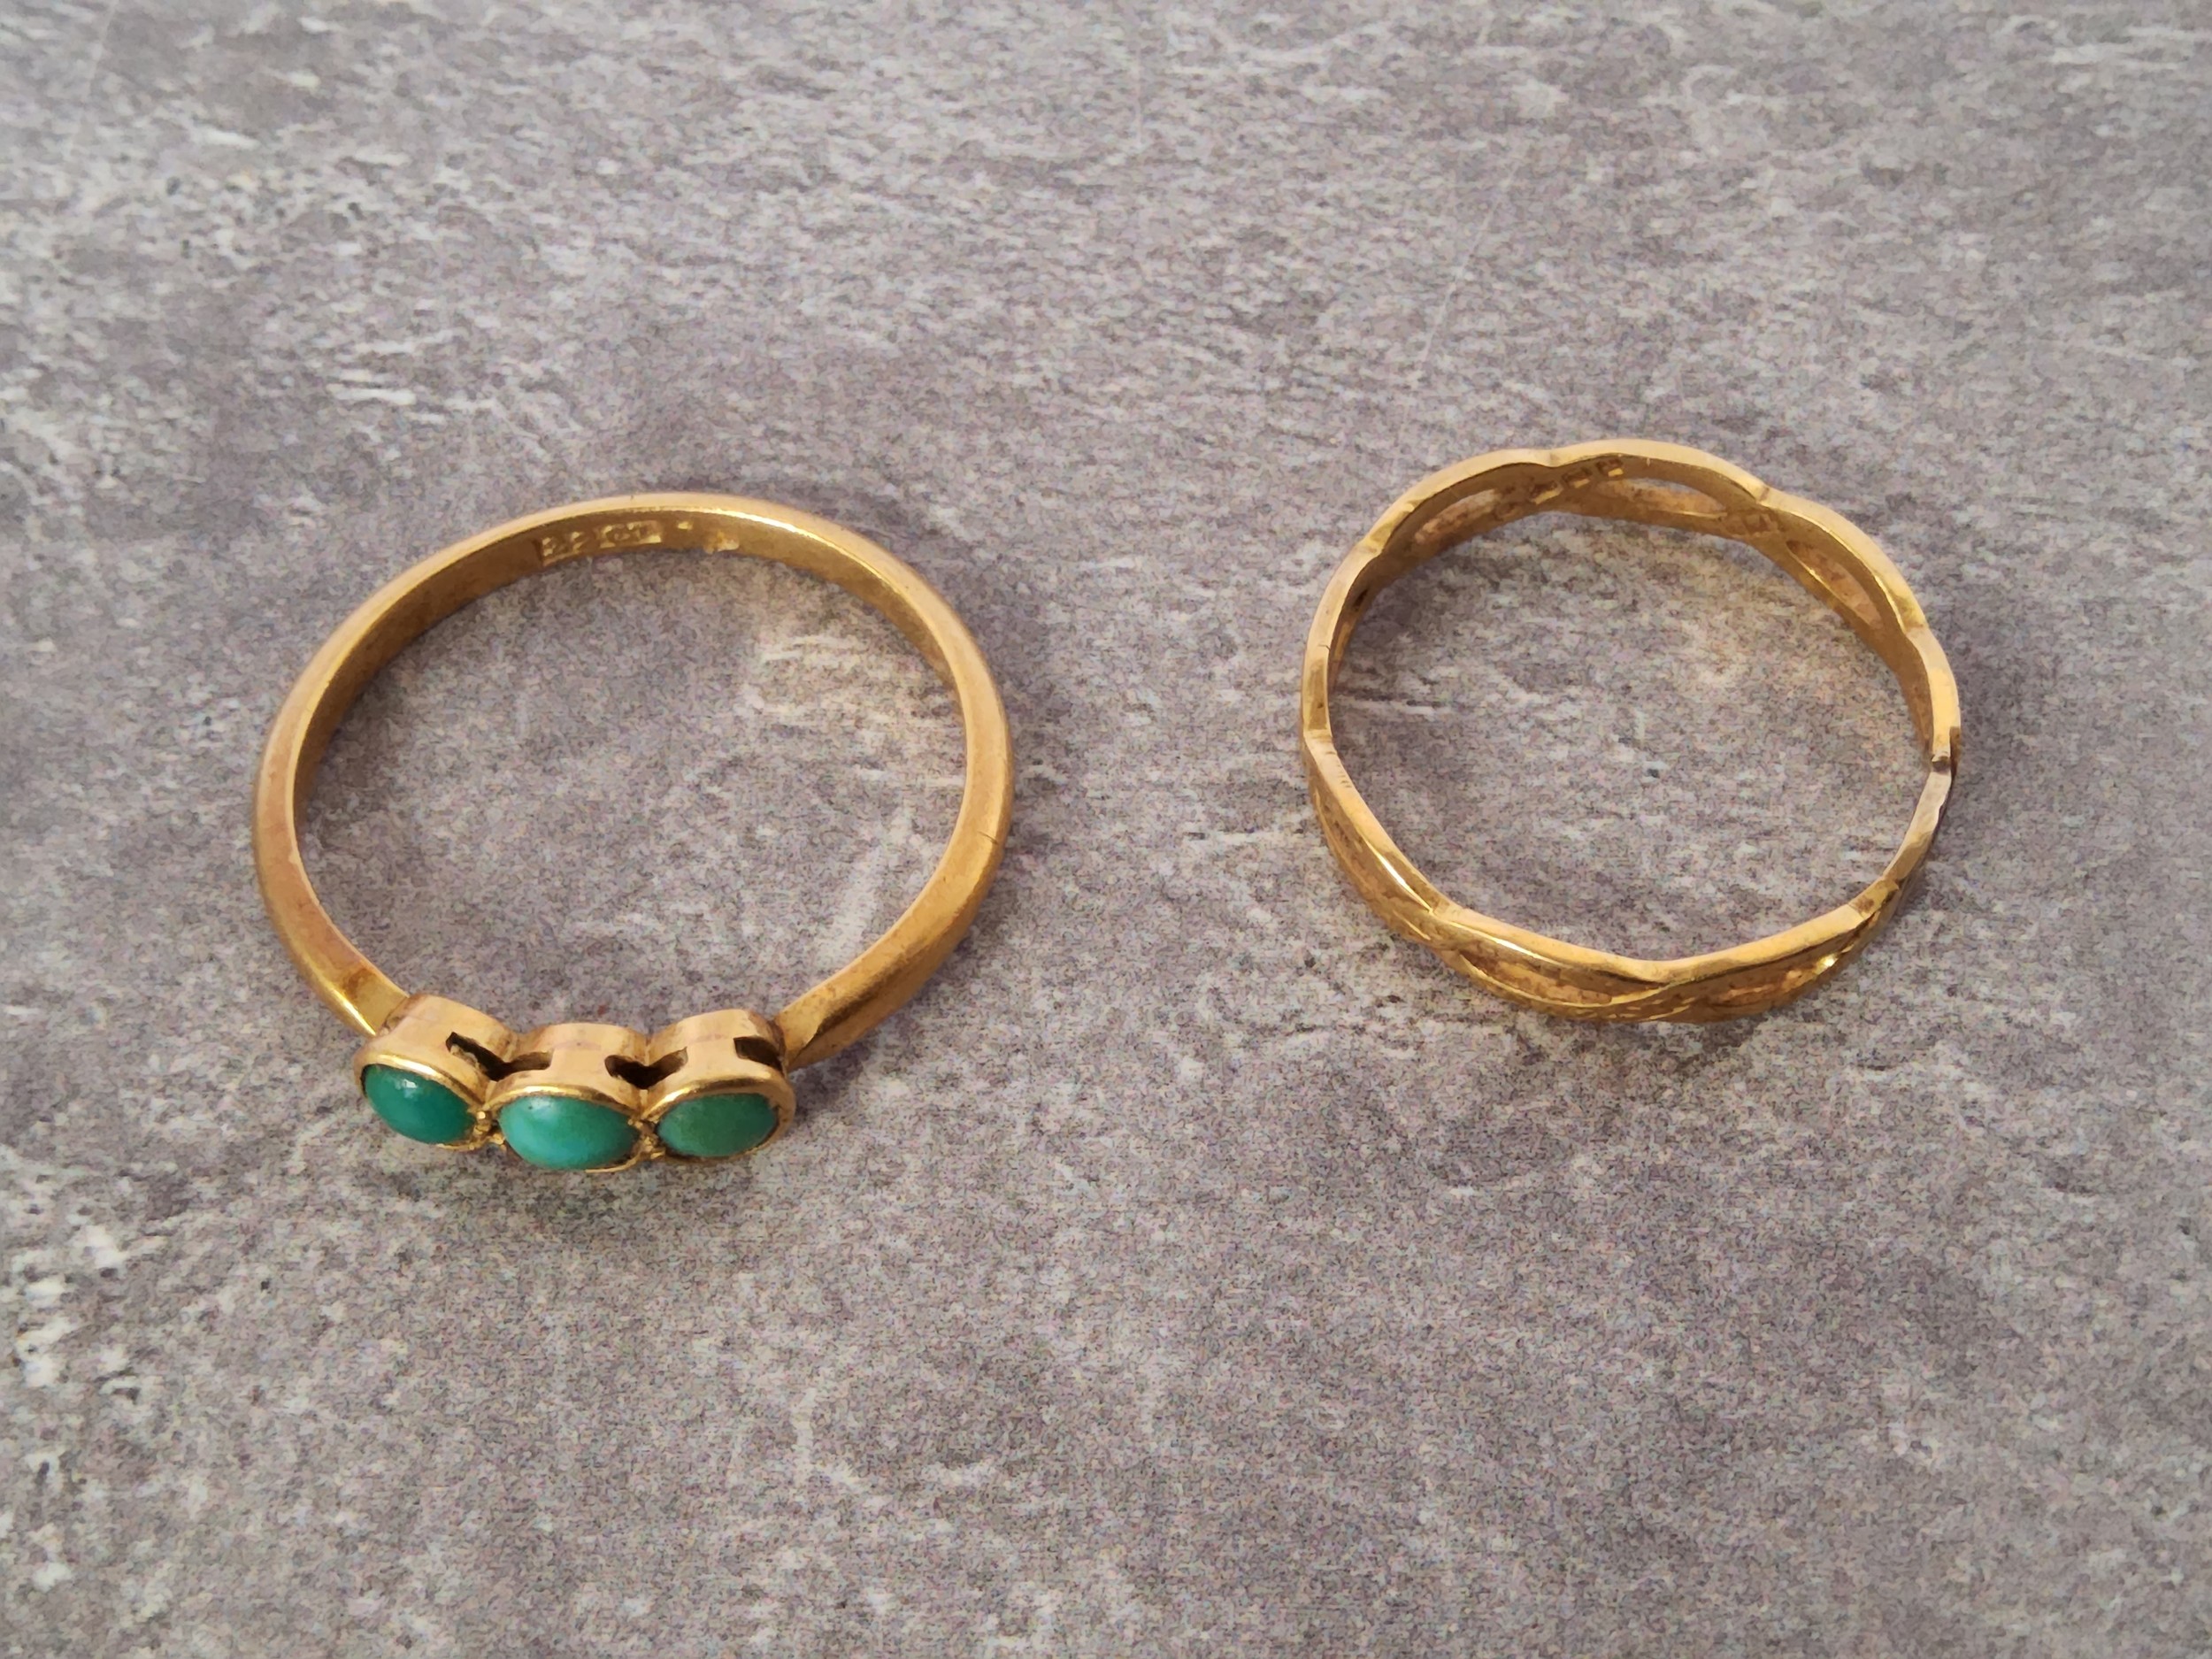 A 22ct gold open Celtic plait band 2.88g; a 22ct gold set with three round turquoise stones 4.43g - Image 2 of 2